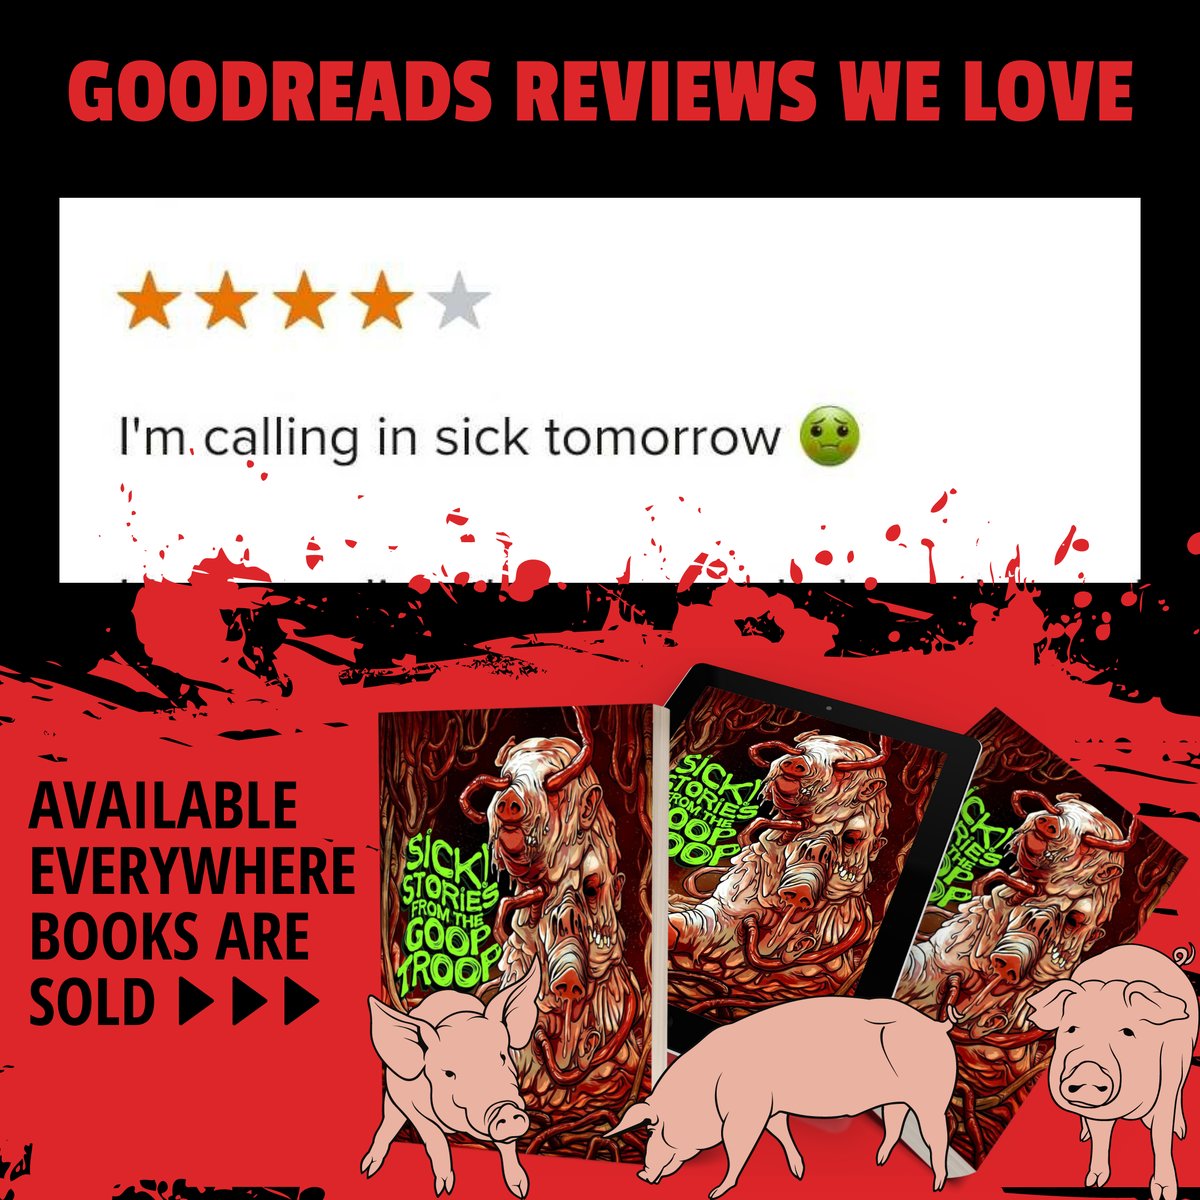 SICK! STORIES FROM THE GOOP TROOP is a collection by the most gag-inducing authors around. Their stories feature fluid-swapping, cannibalism, bug-eating, bodily disintegration, and more. Steel your stomach and prepare to get SICK! 💰 BUY THE BOOK! rfr.bz/tlcksbu